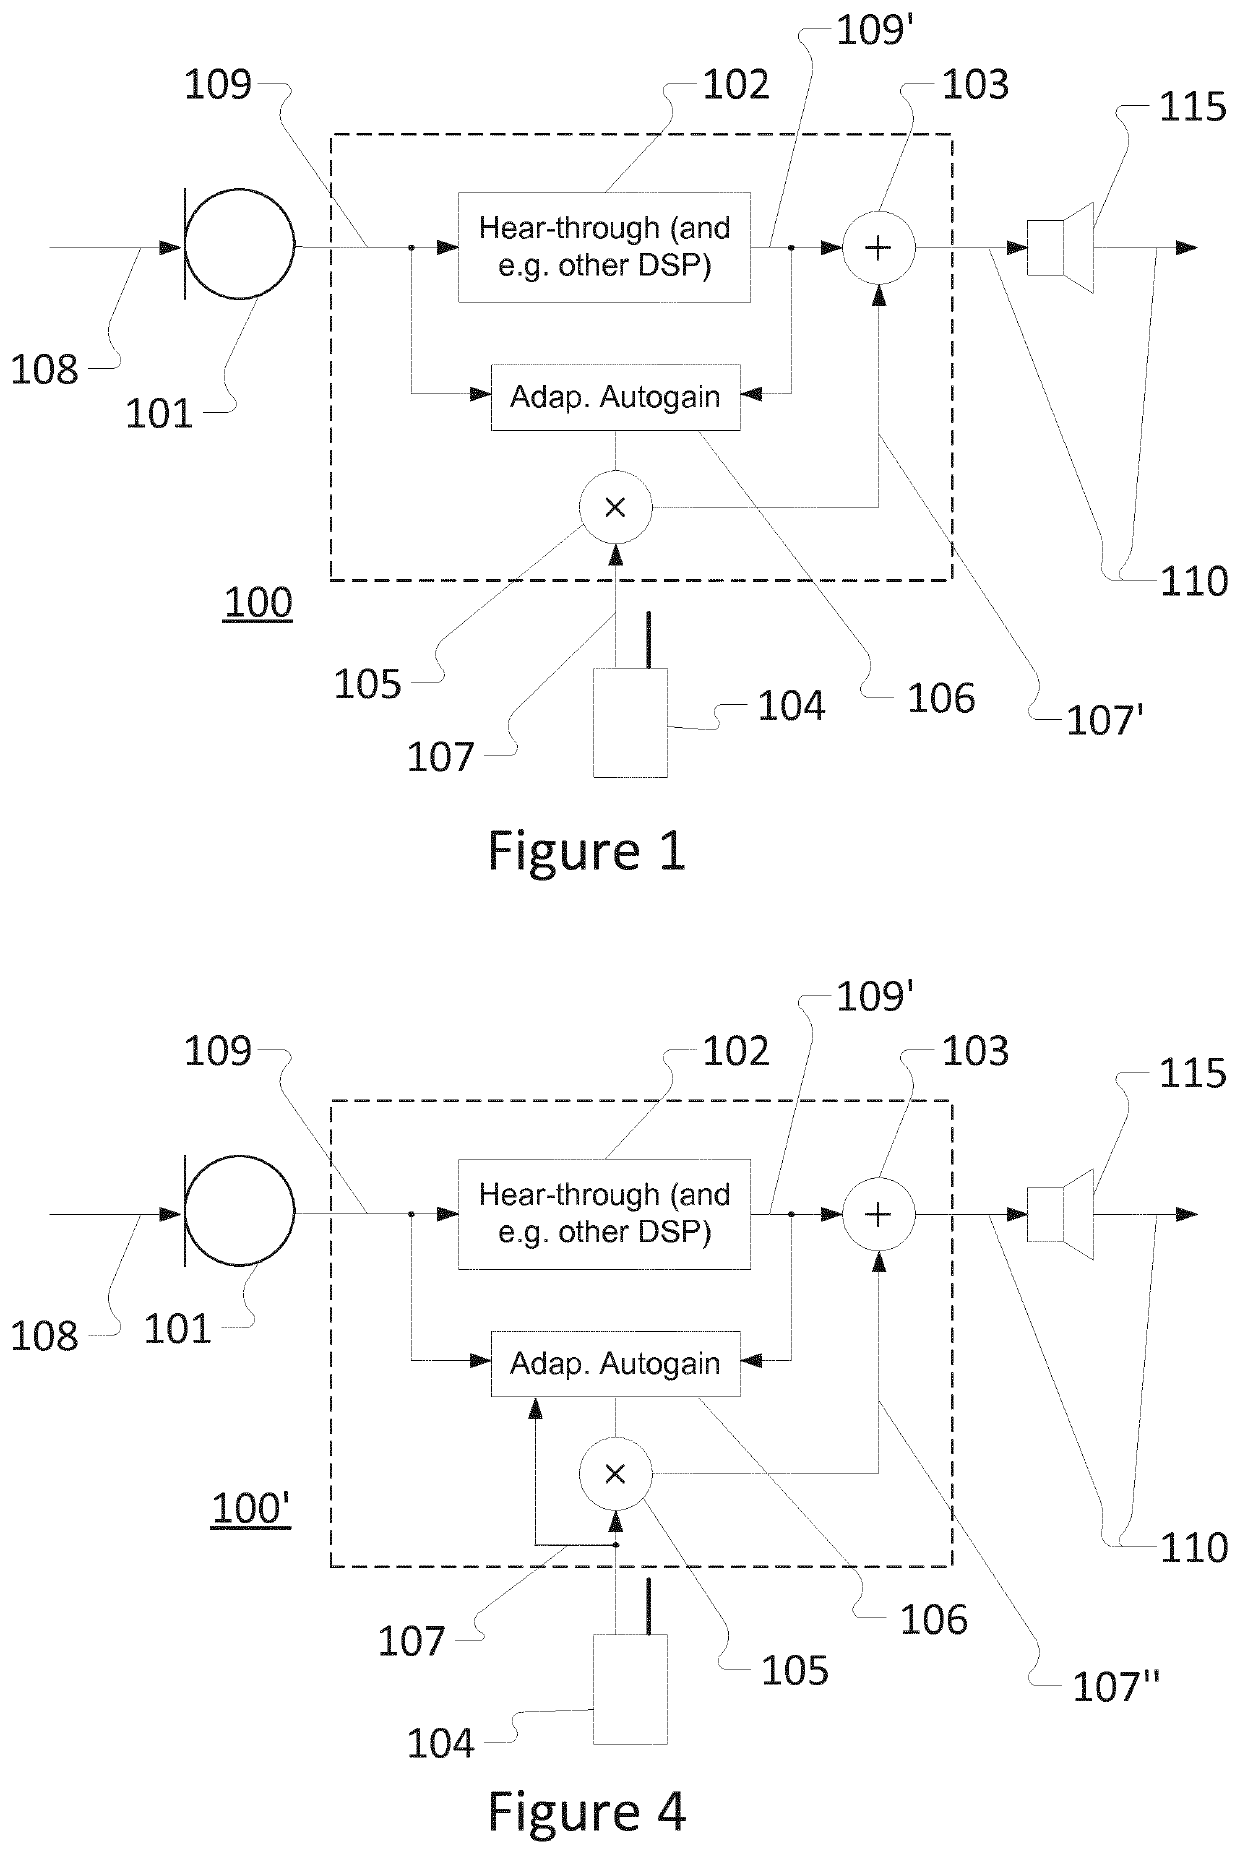 An audio device with adaptive auto-gain